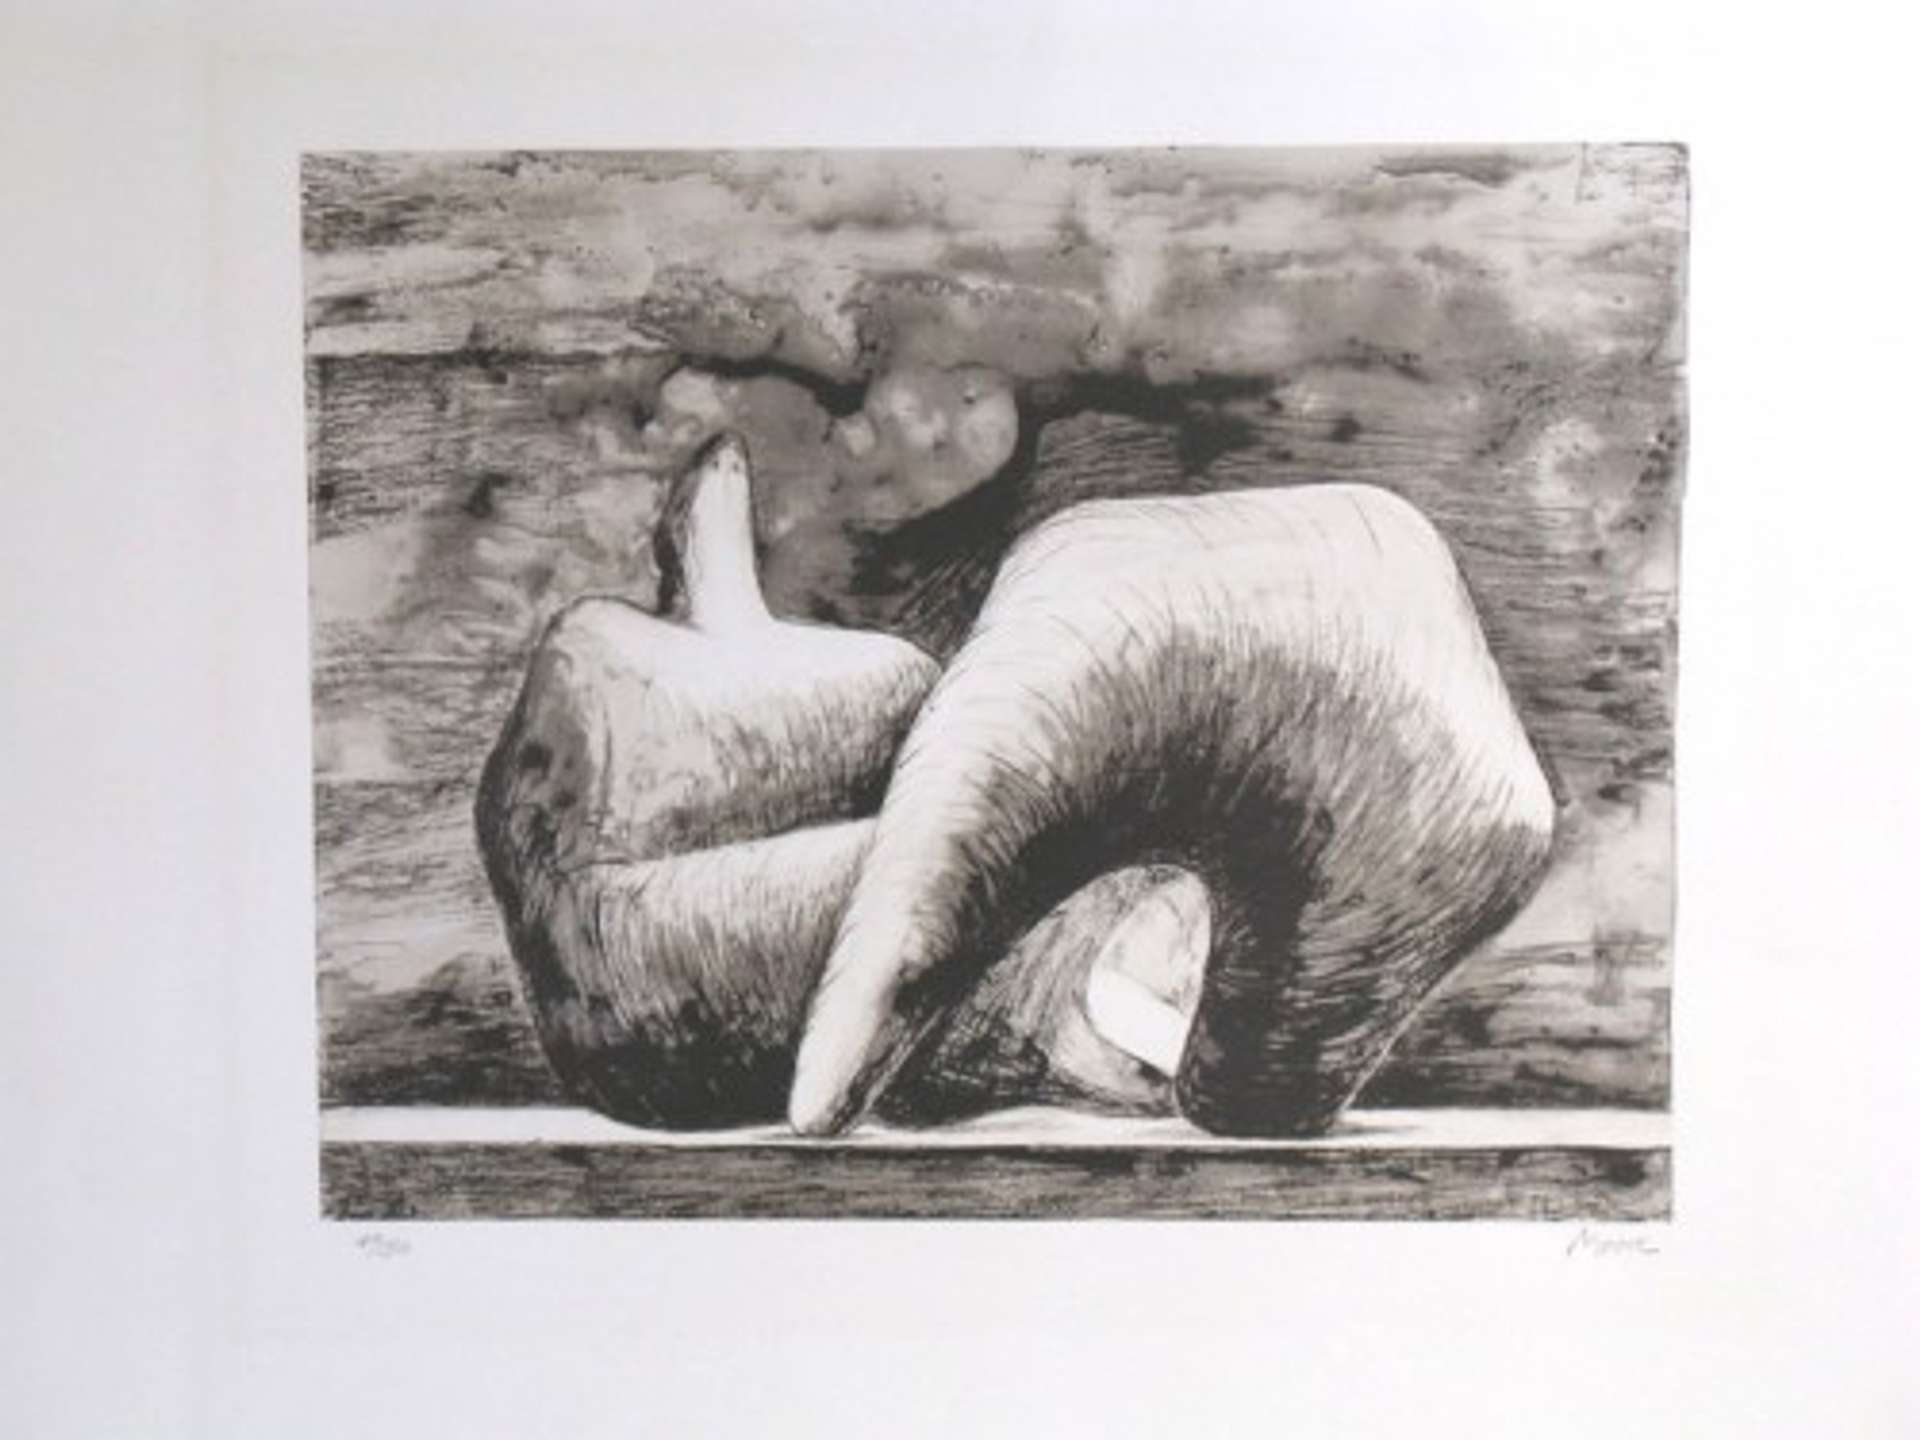  An artwork of two abstracted figures depicted with charcoal, creating a blurred background and intertwining with each other.